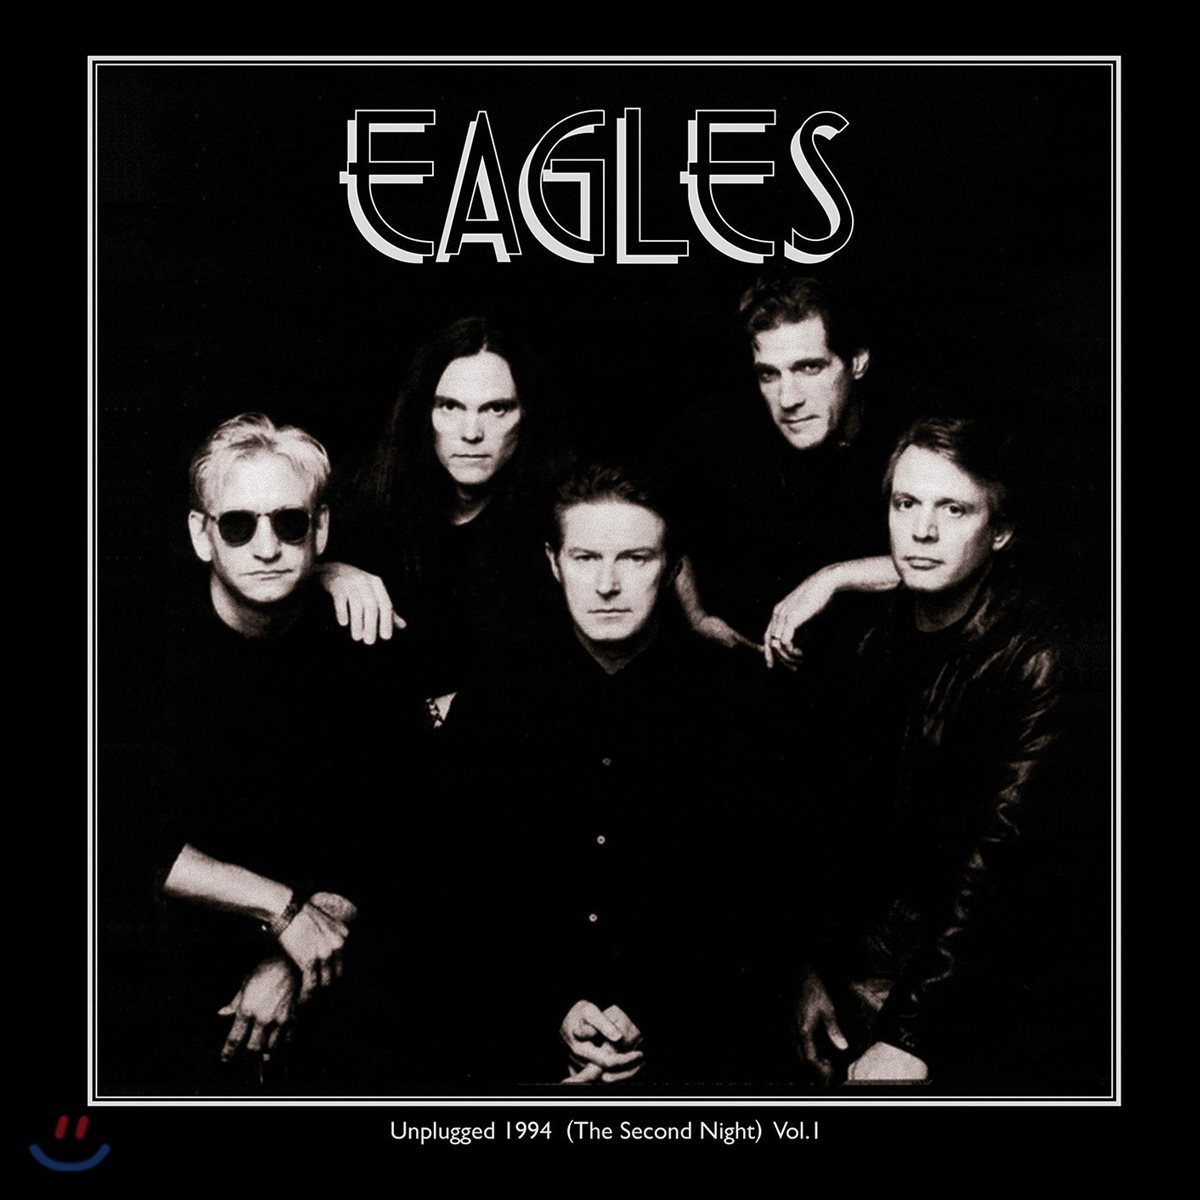 Eagles (이글스) - Unplugged 1994: The Second Night Vol.1 [2LP]